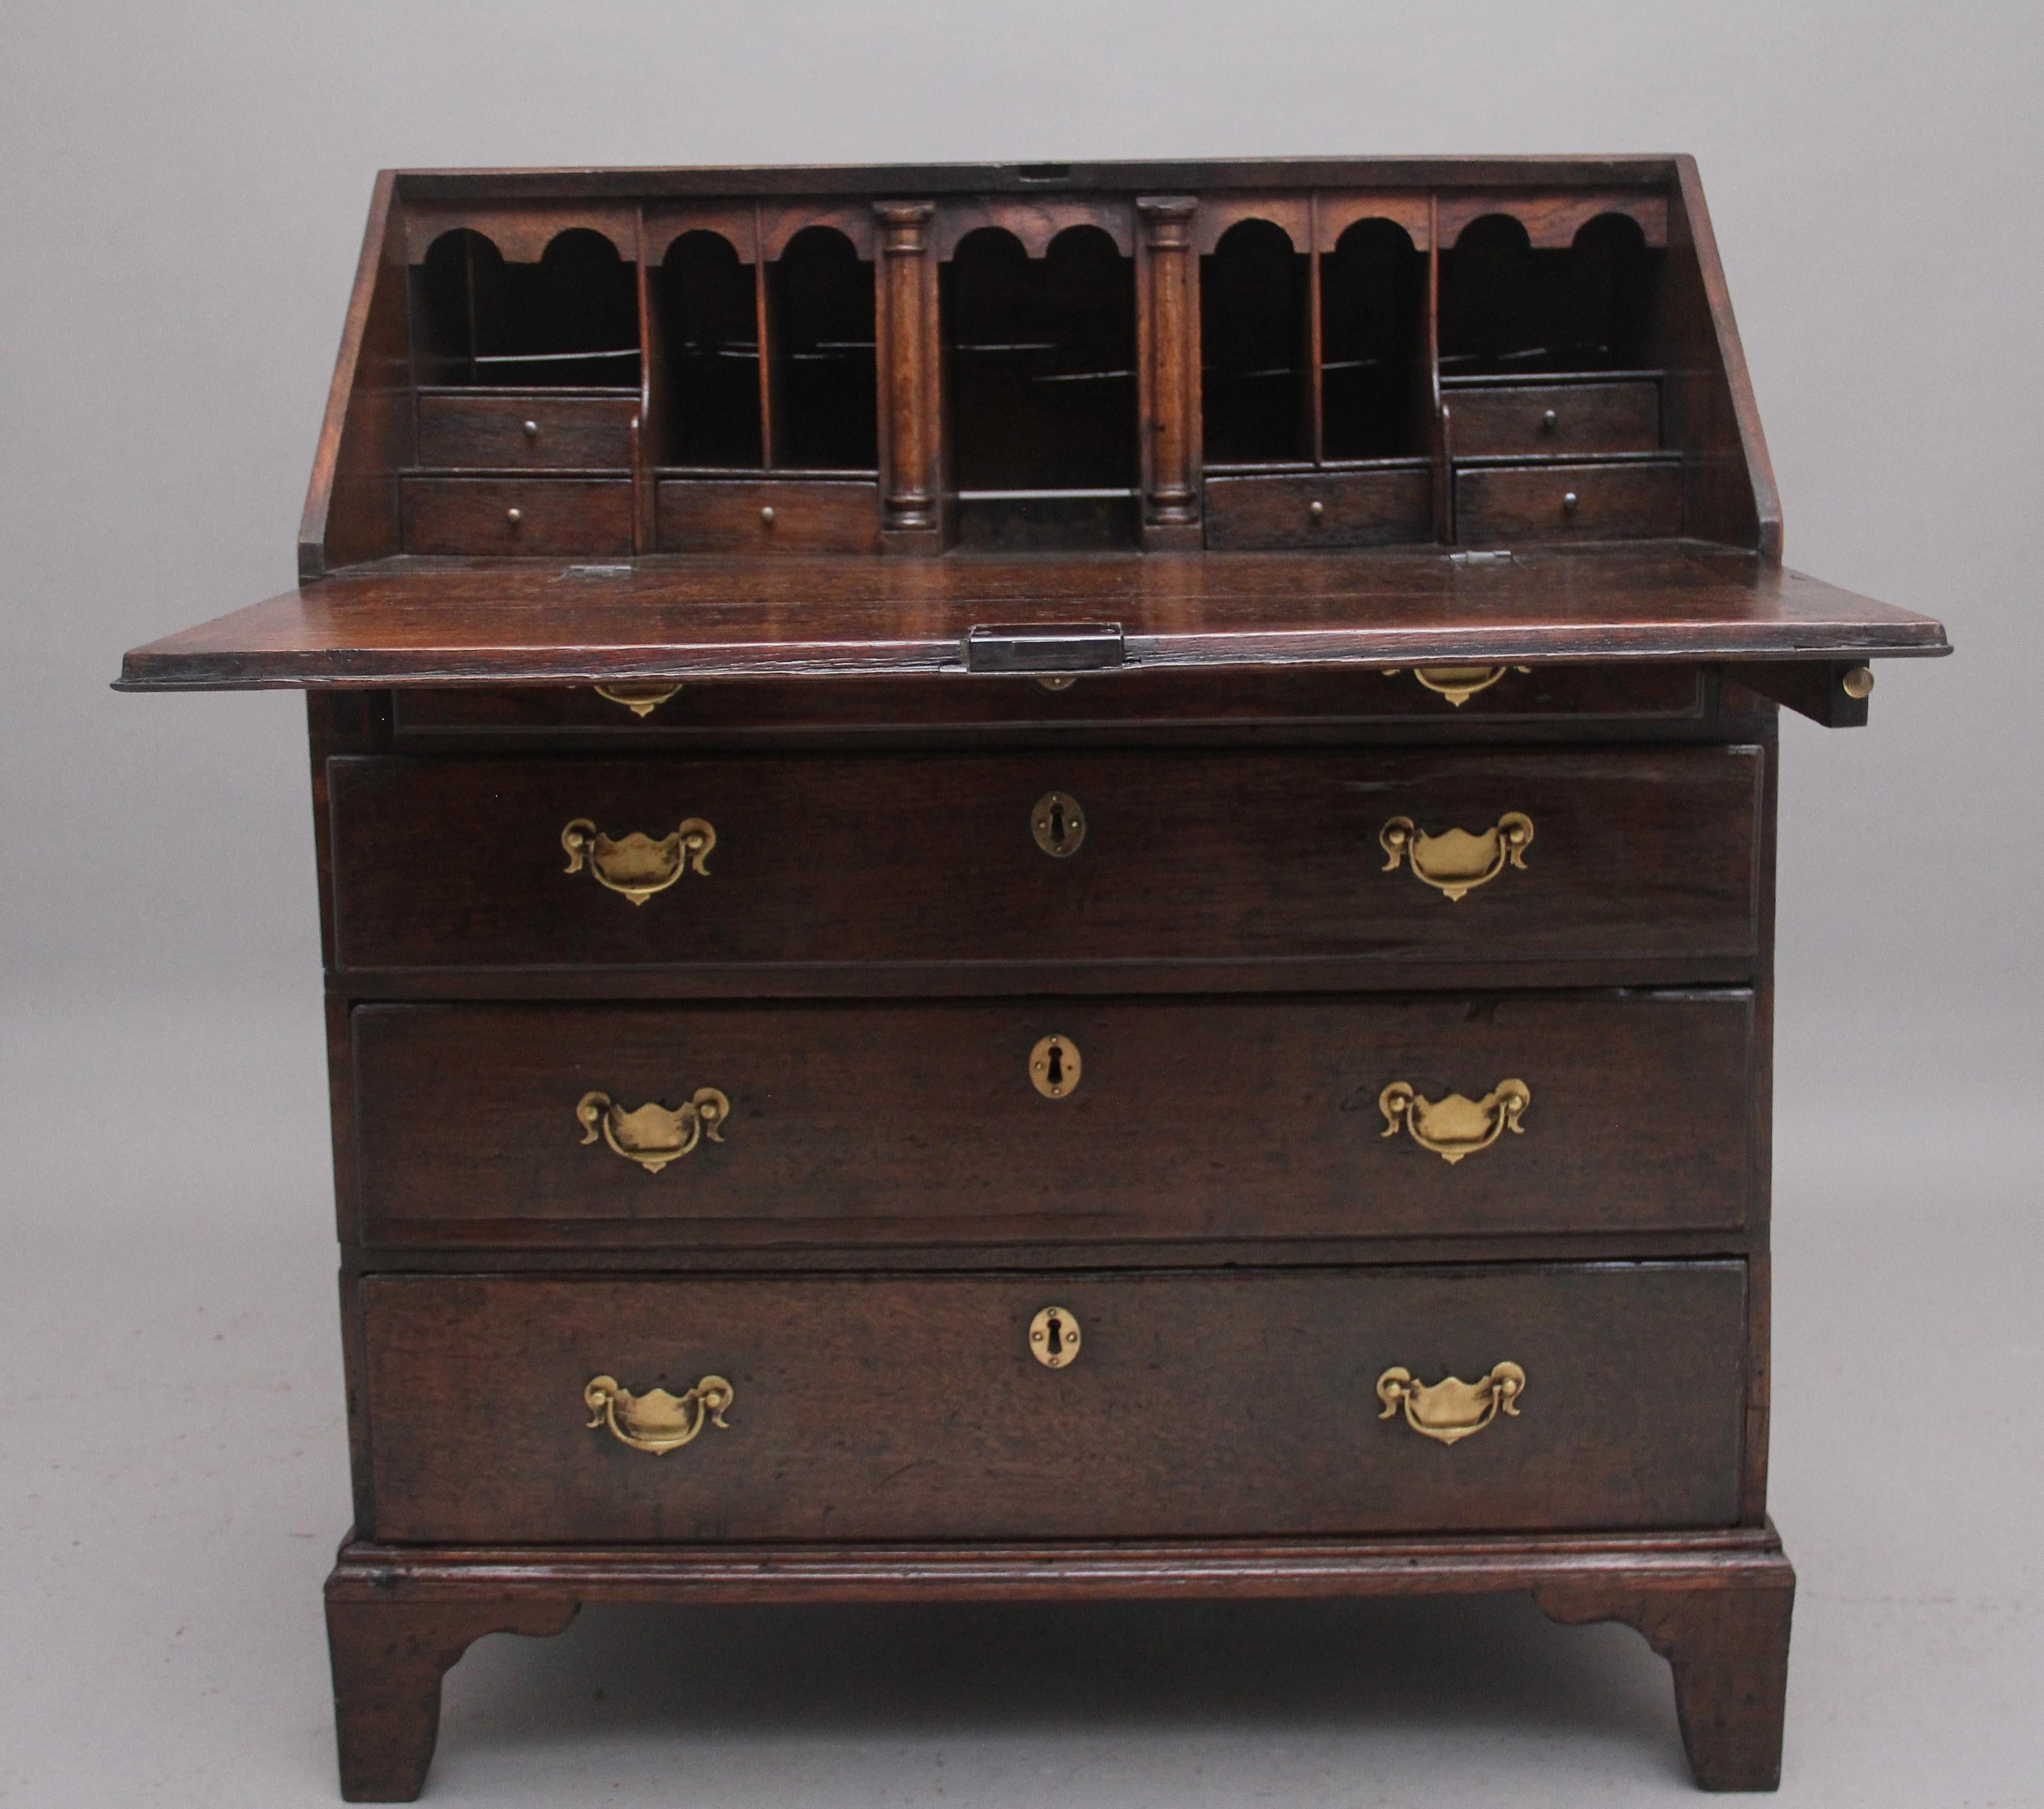 Early 18th century oak bureau, the fall opening to reveal a lovely fitted interior with various drawers, pull out slides and compartments, the bureau having four graduated drawers with brass plate handles and escutcheons, standing on bracket feet.